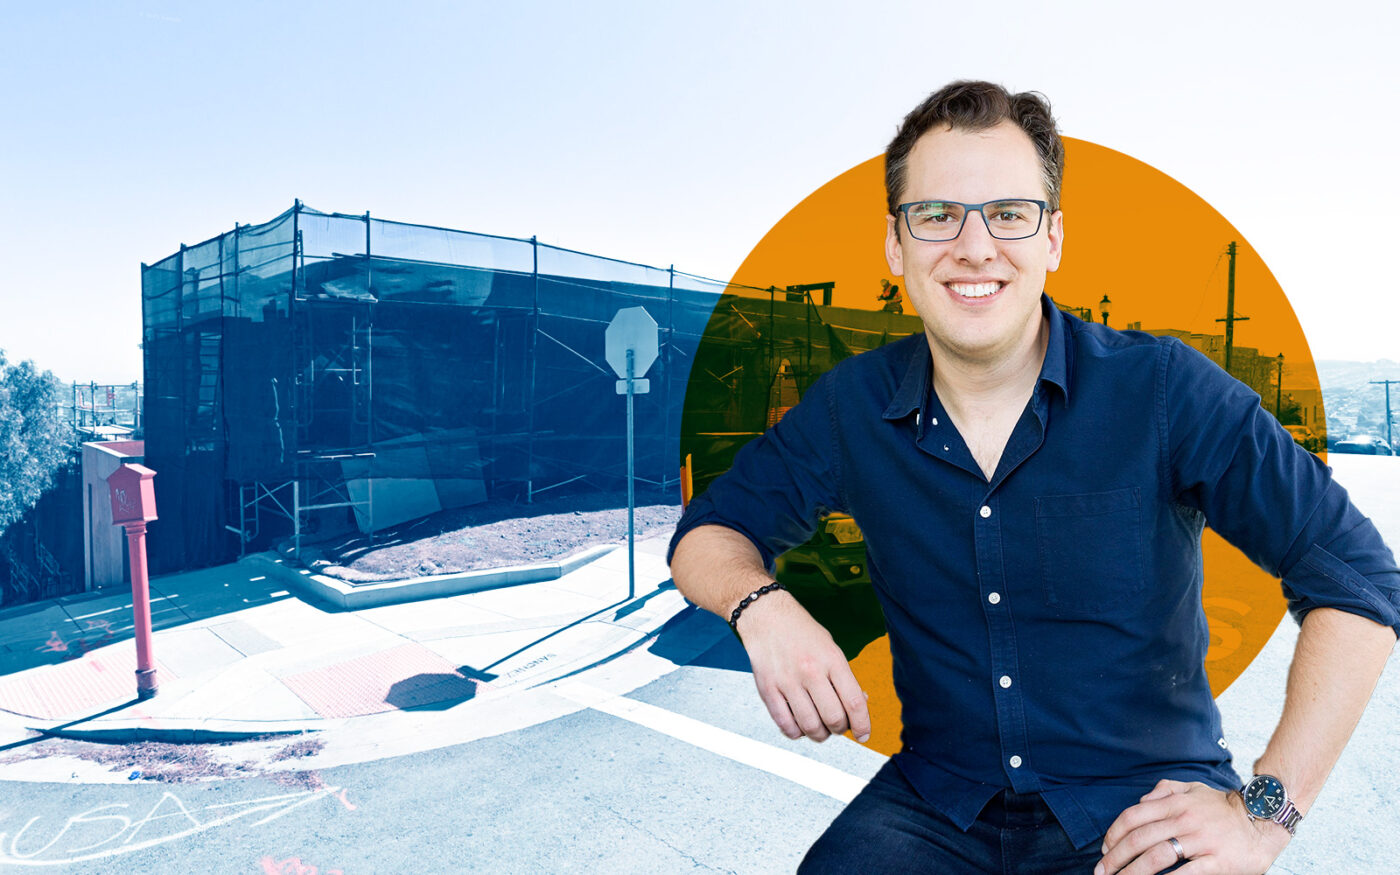 Instagram Co-Founder Mike Krieger Builds Box-Like Home in SF